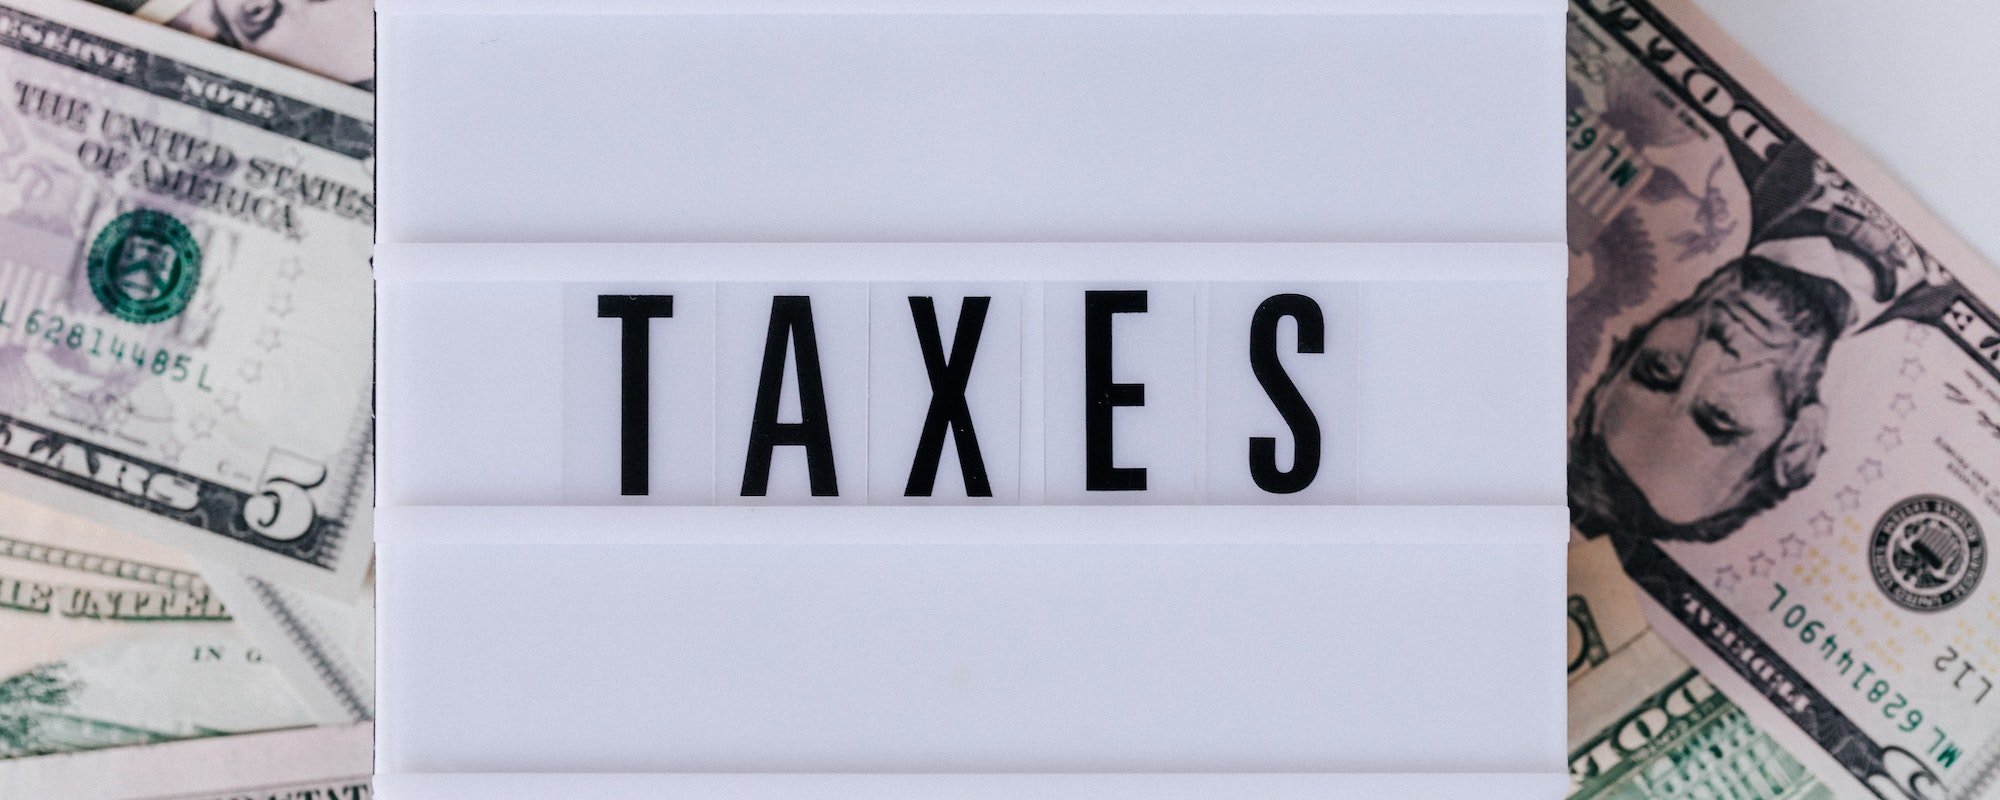 A box sign that says "taxes" lying on money